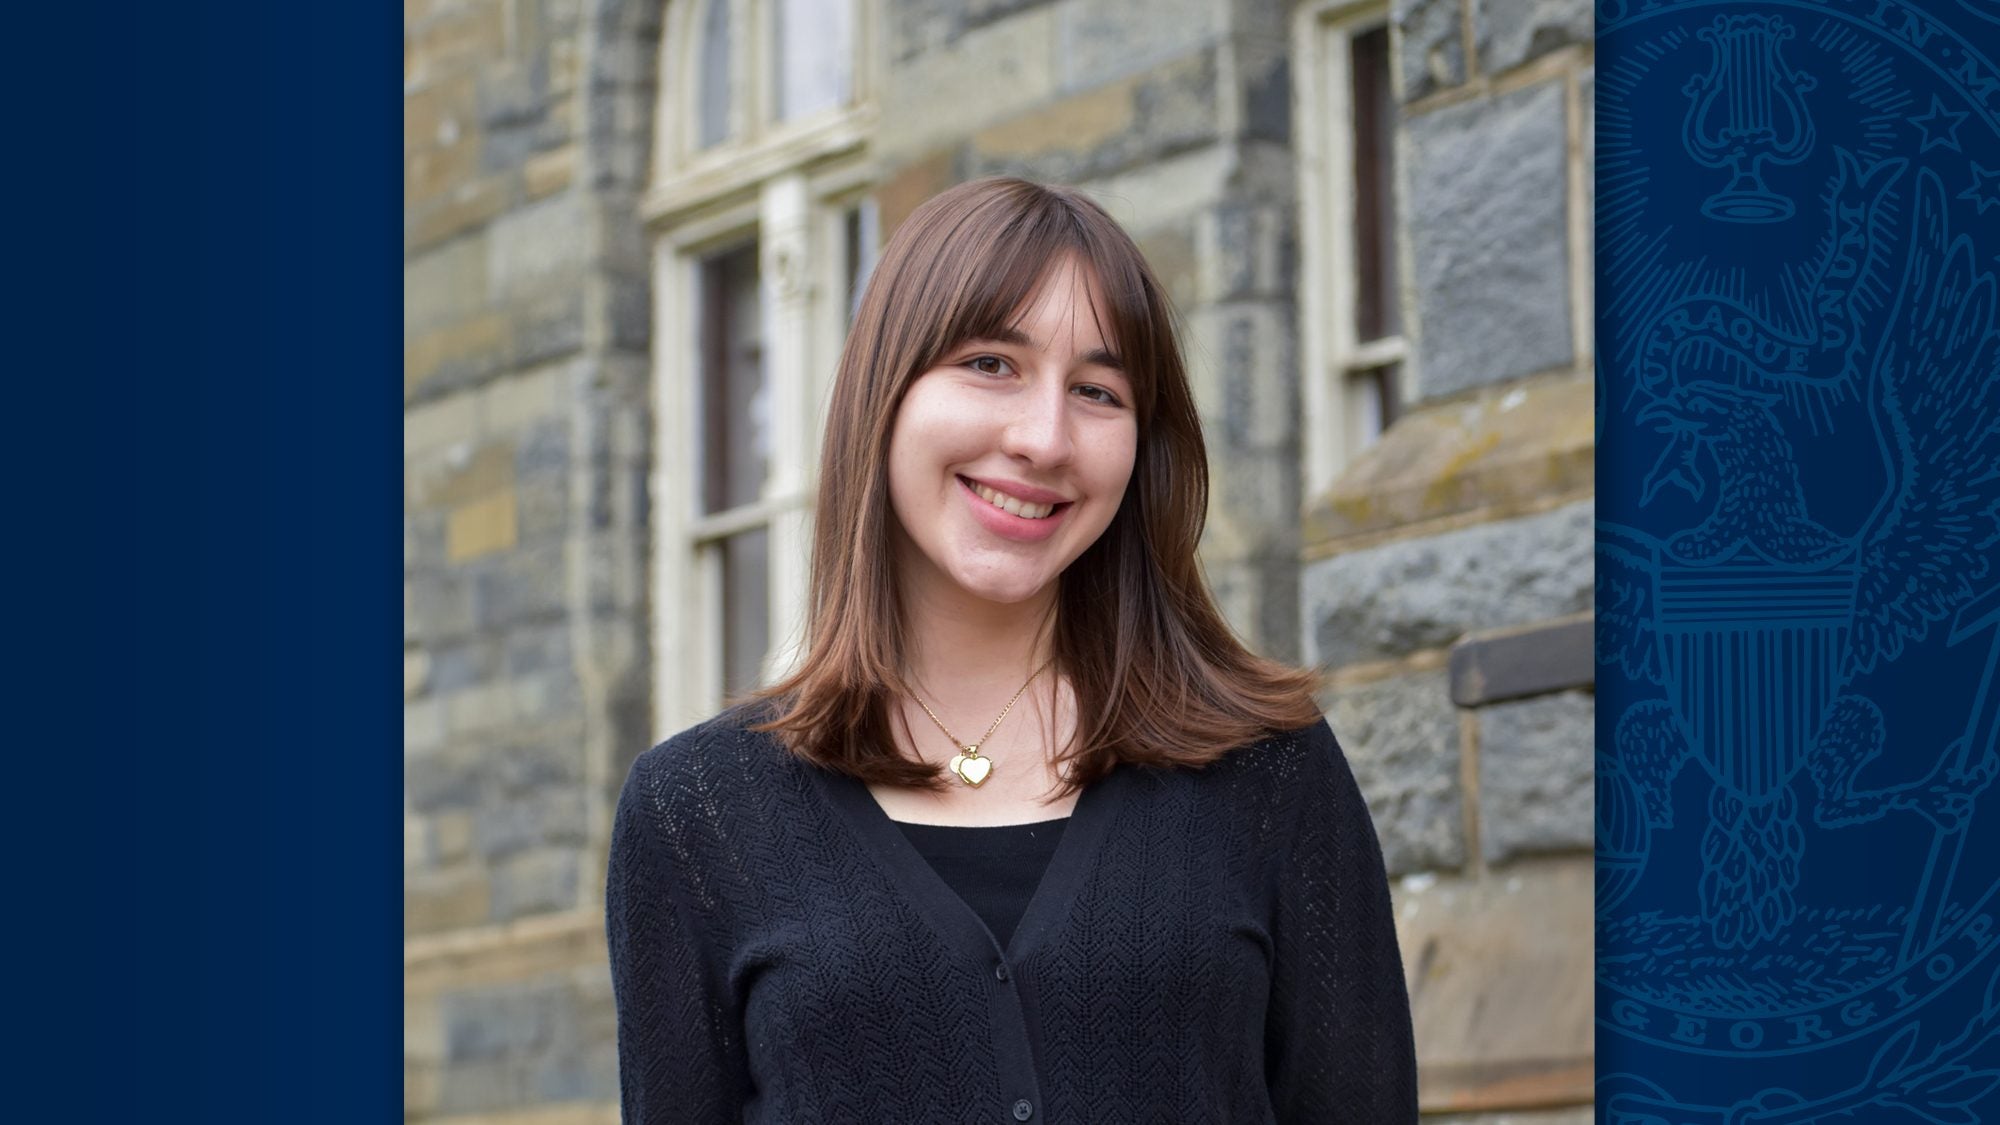 A headshot of Georgetown alumna Neval Mulaomerovic, who wears black and stands in front of a stone wall.